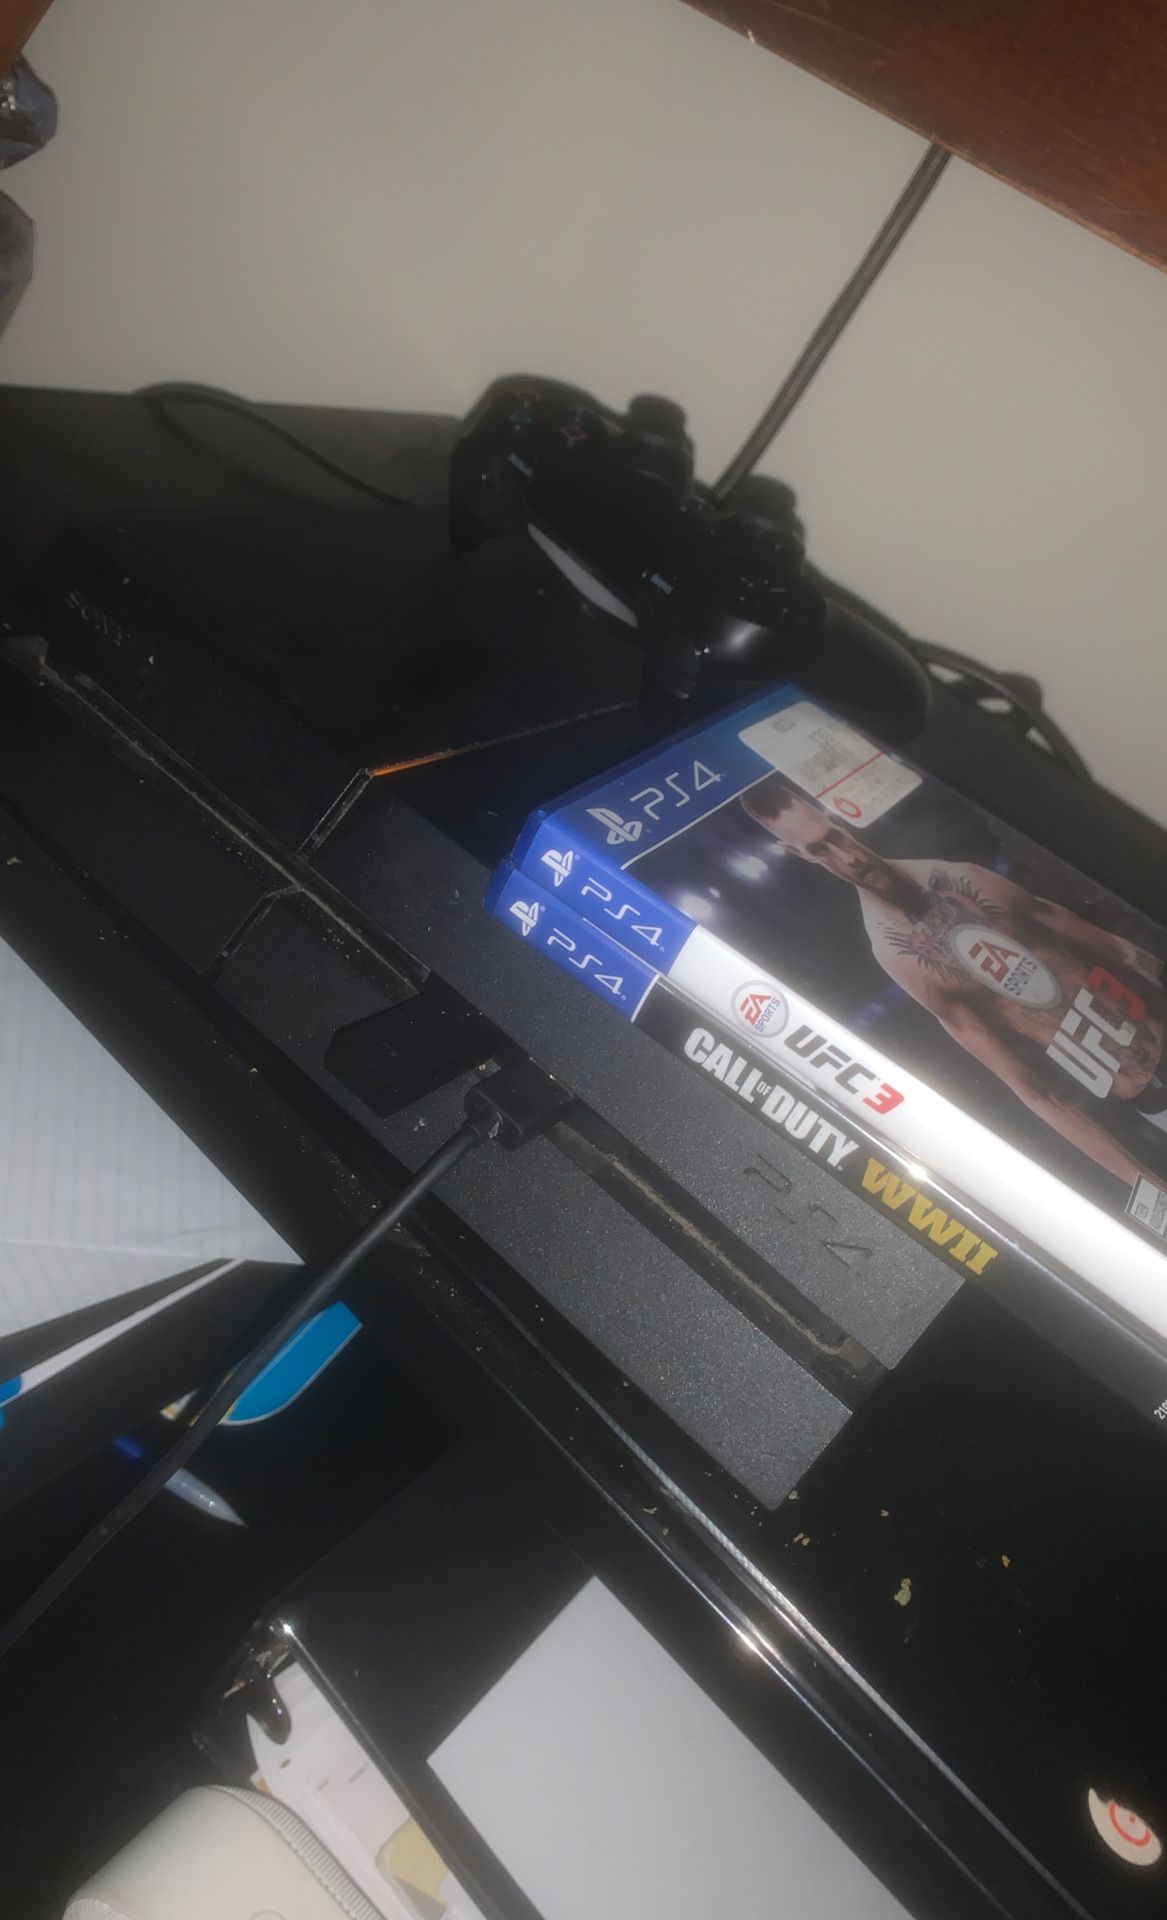 PS4 with headphones and 4 games